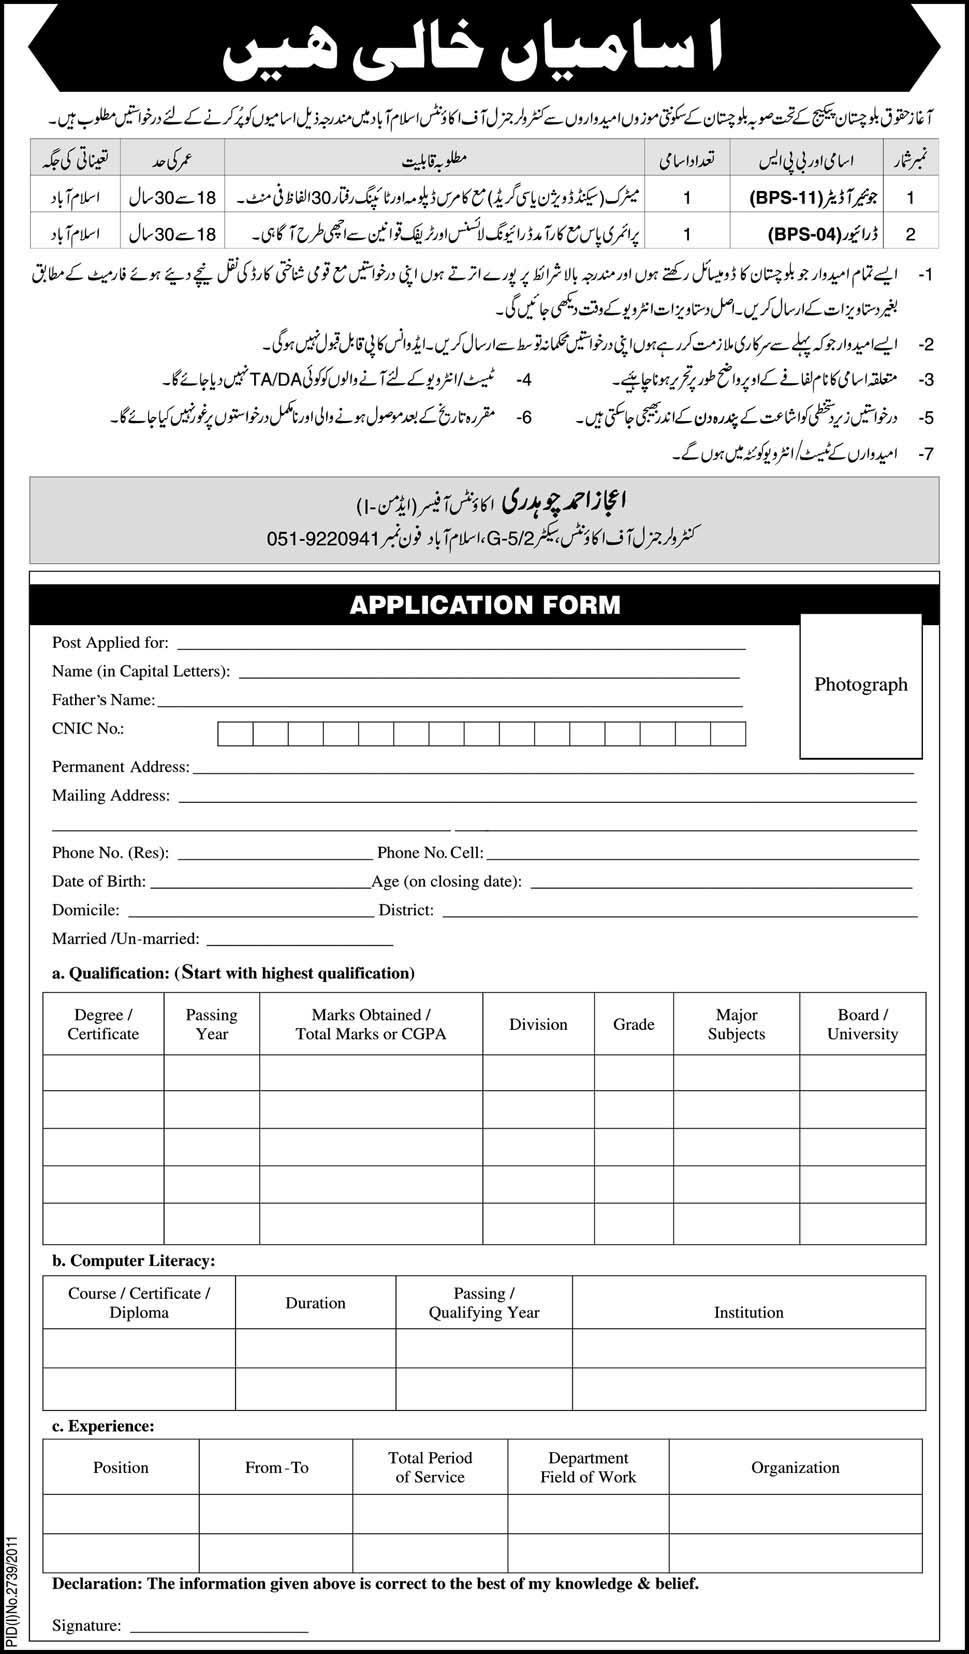 Controller General of Accounts Islamabad Required Junior Auditor and Driver